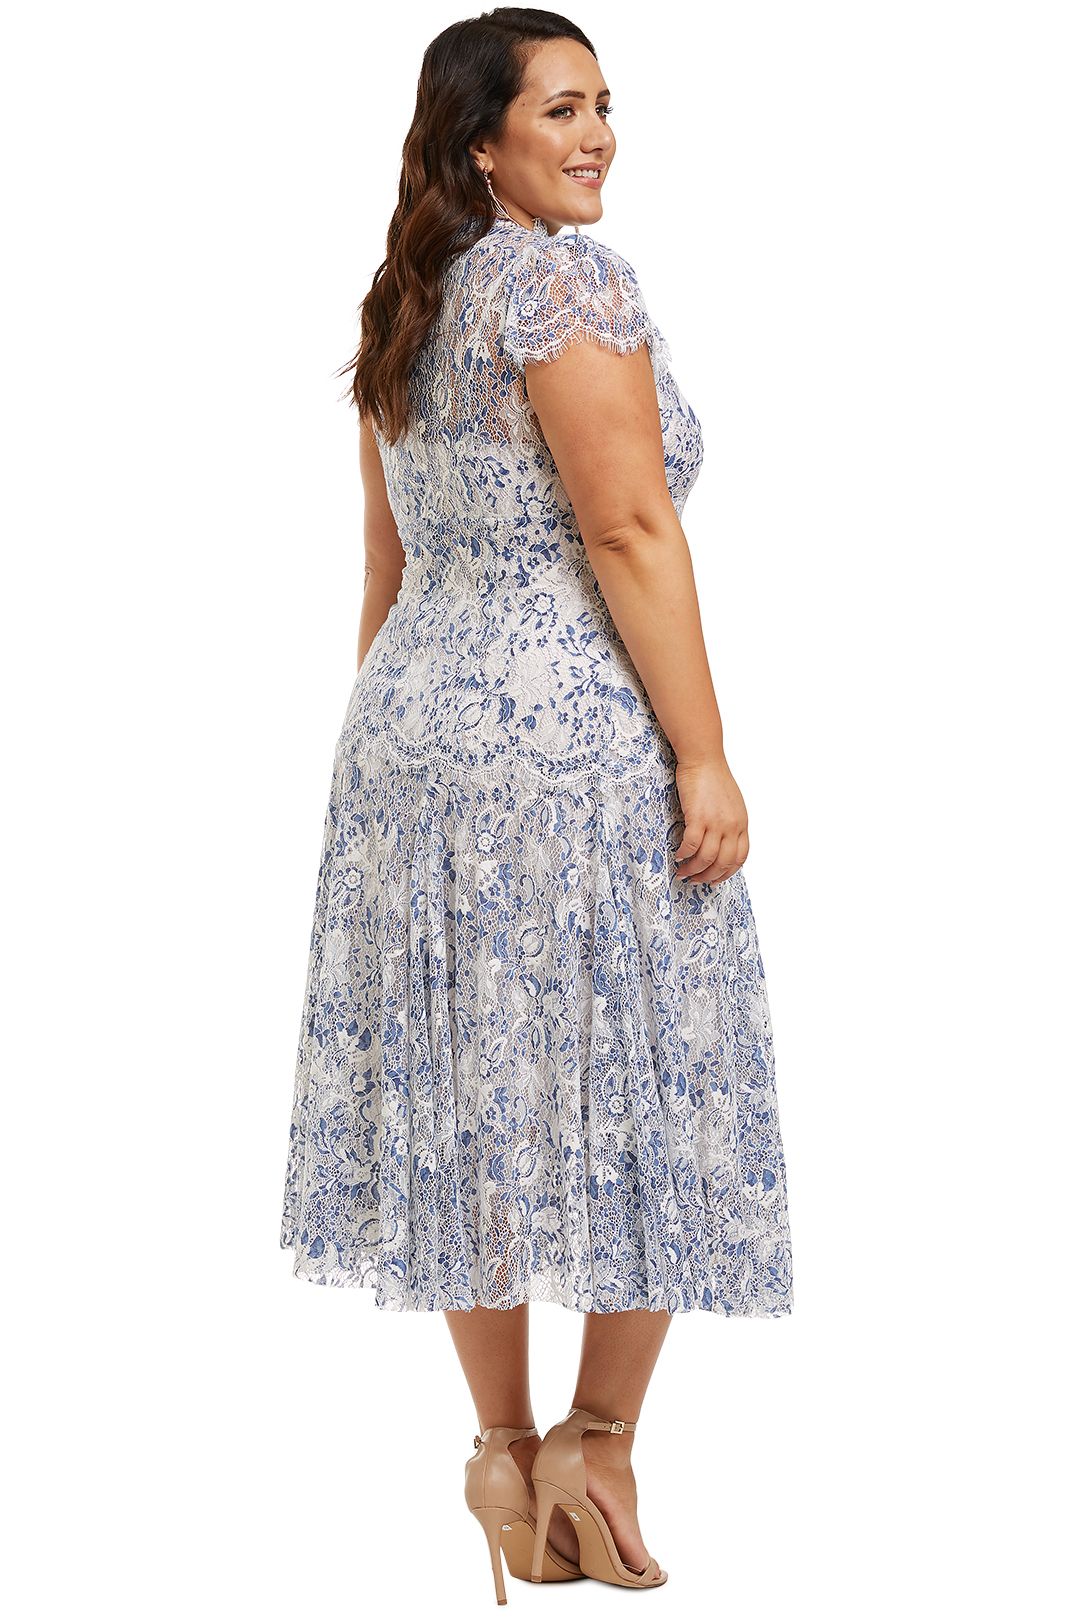 Moss-and-Spy-Elodie-Dress-Blue-Back